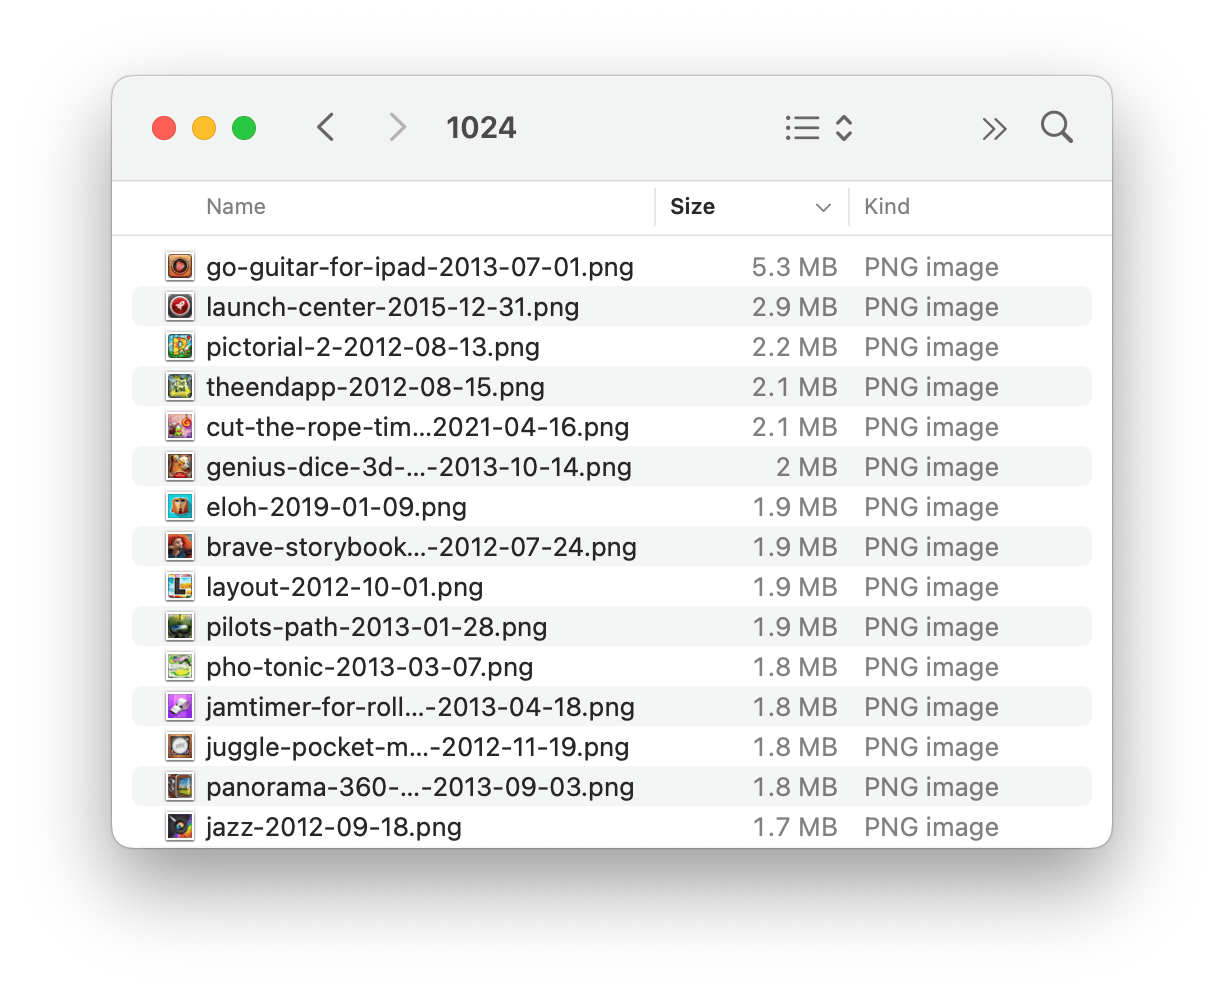 Screenshot of macos finder showing a list of PNG files sorted by size, the largest one being 5.3MB.